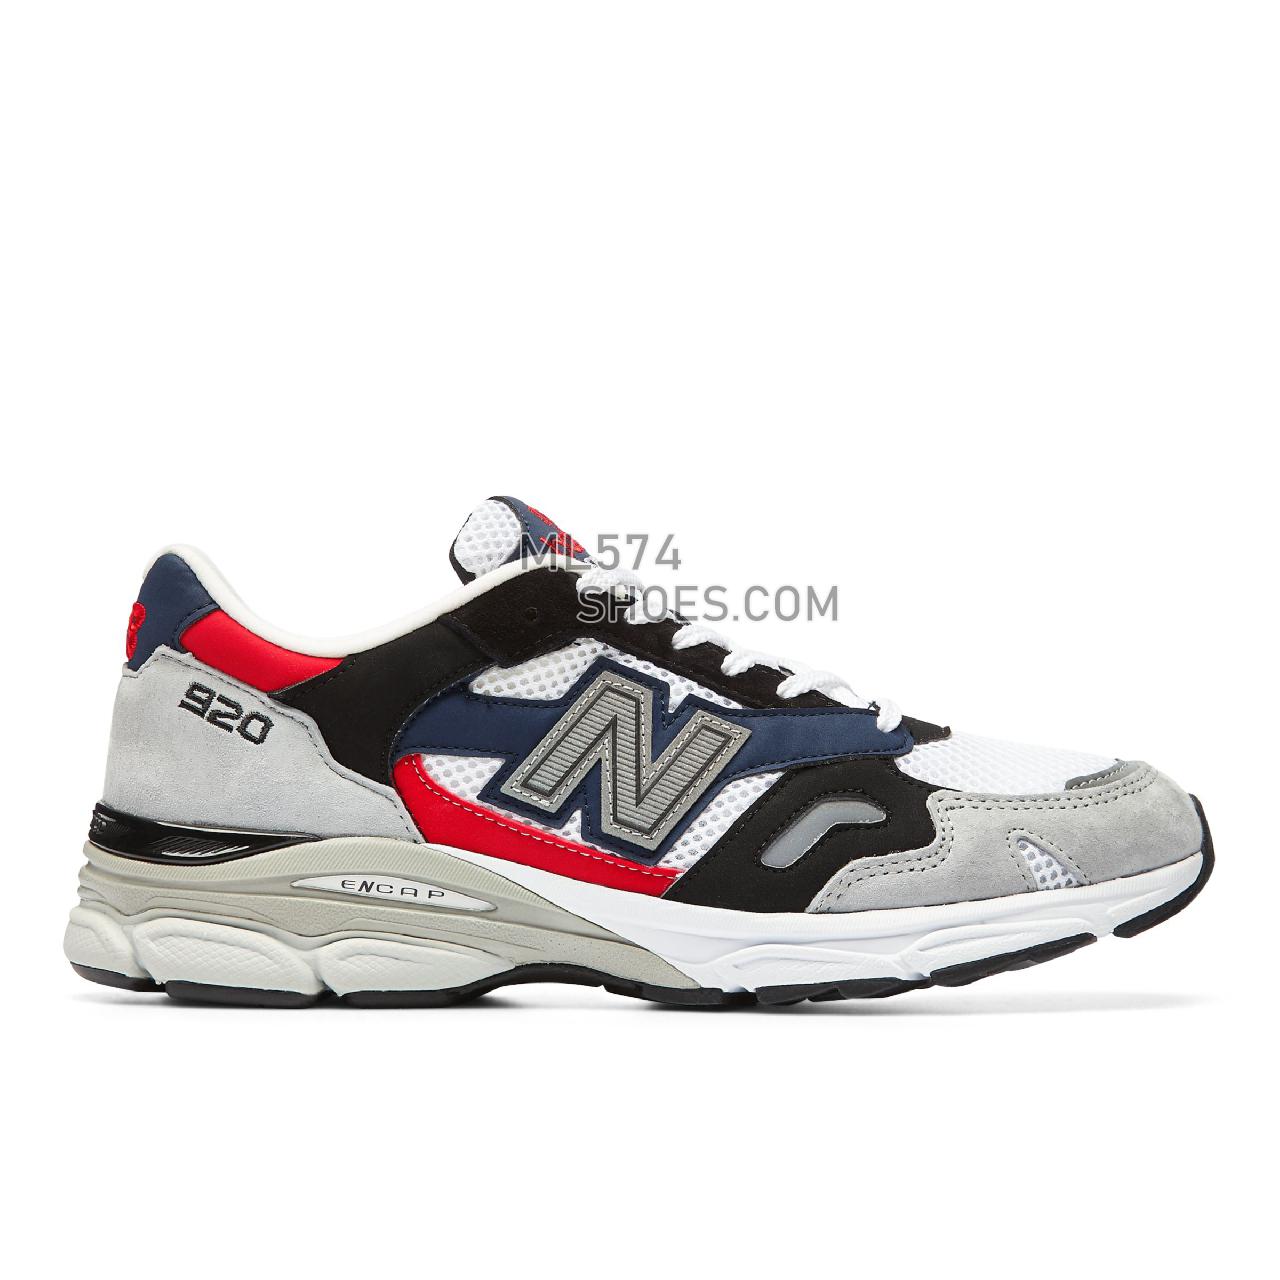 New Balance MADE in UK 920 - Men's Made in USA And UK Sneakers - Grey with black and white - M920GKR